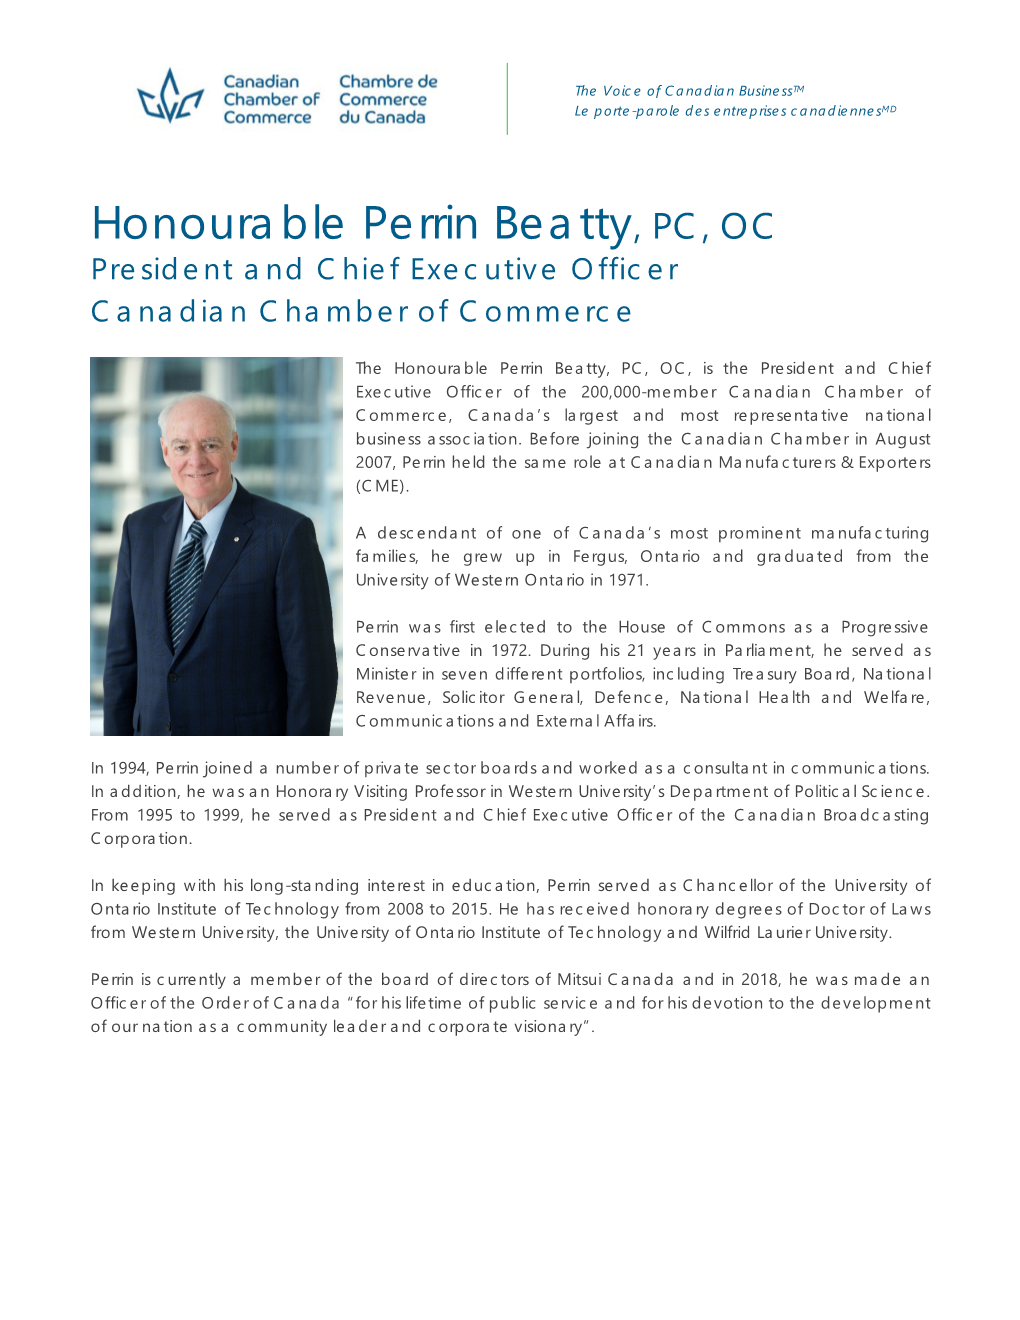 Honourable Perrin Beatty, PC, OC President and Chief Executive Officer Canadian Chamber of Commerce